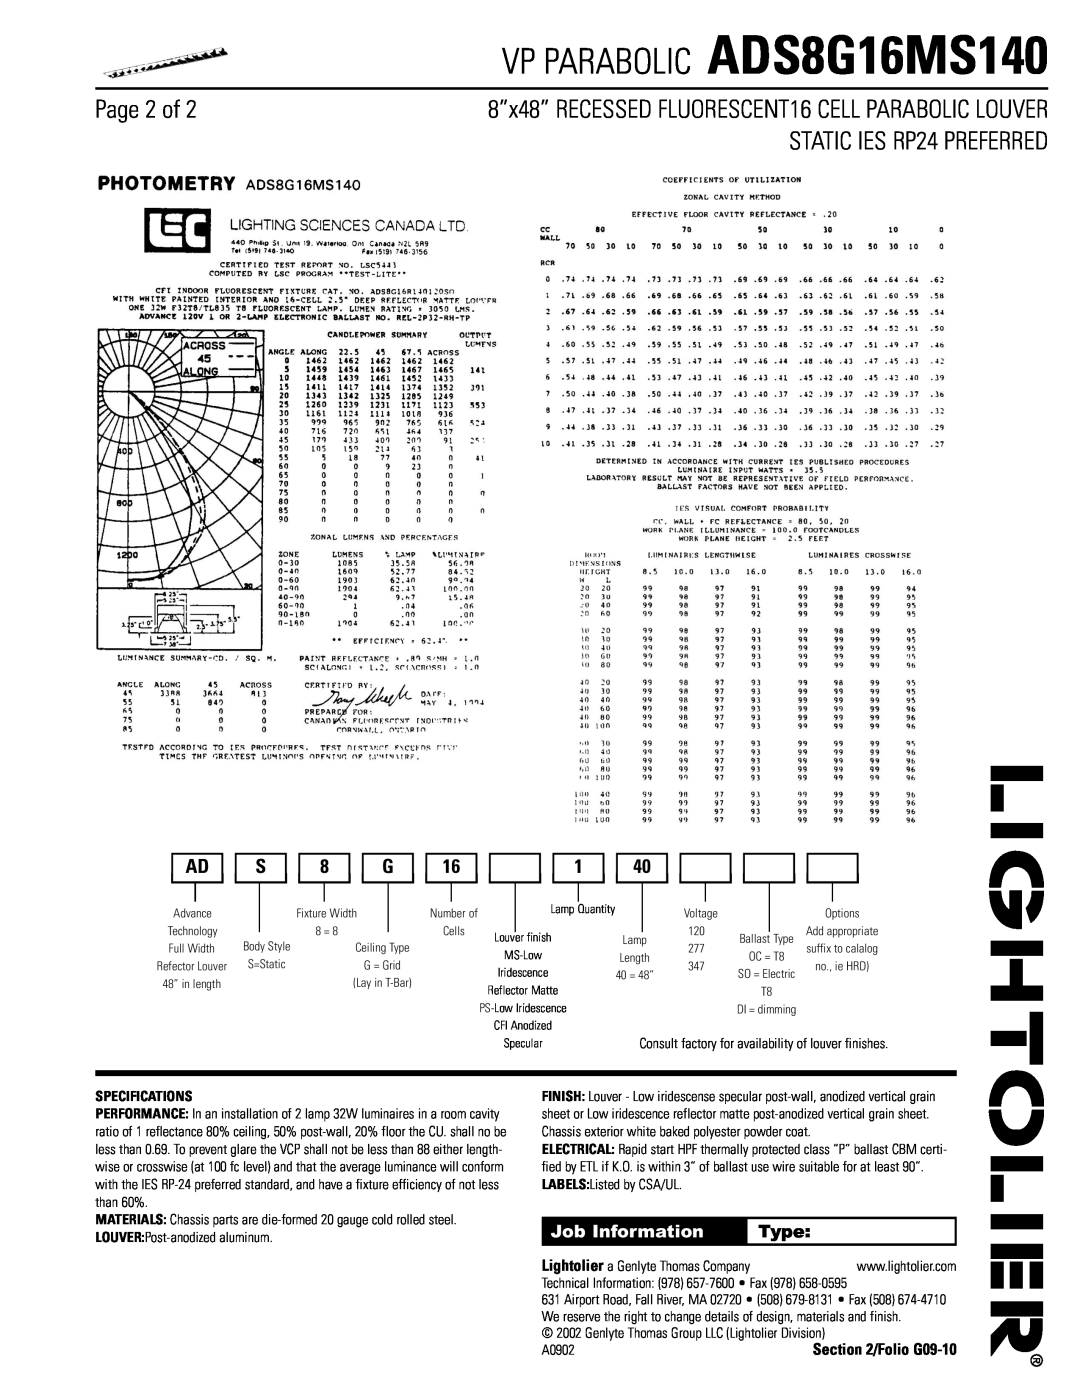 Lightolier manual Page 2 of, VP PARABOLIC ADS8G16MS140, STATIC IES RP24 PREFERRED, Job Information, Type, Specifications 